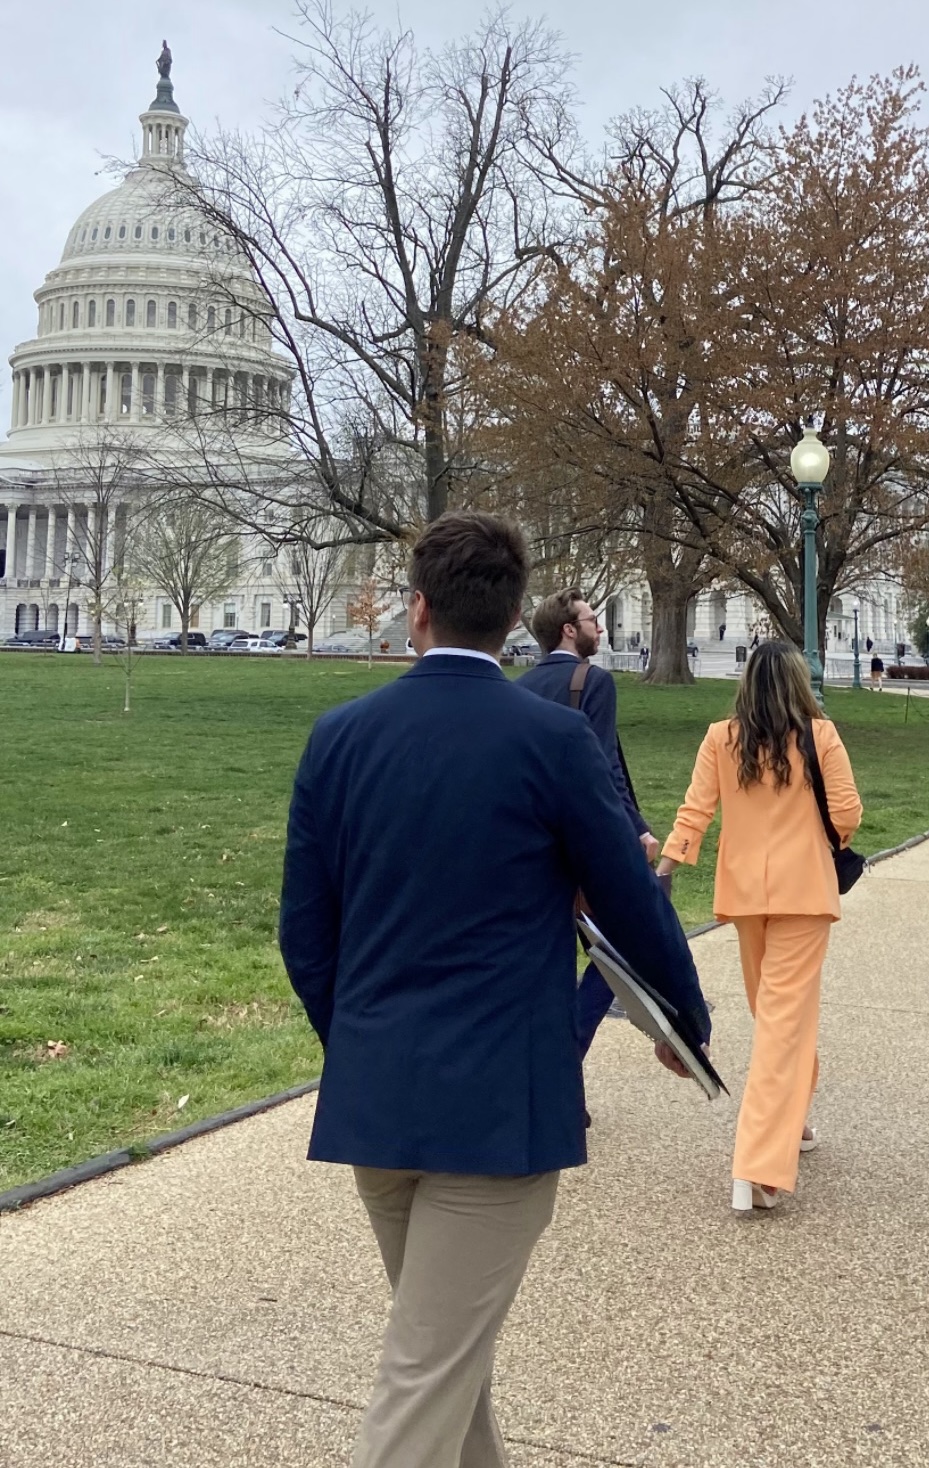 Hassan wears an peach colored suit and walks in front of the Nation's Capitol